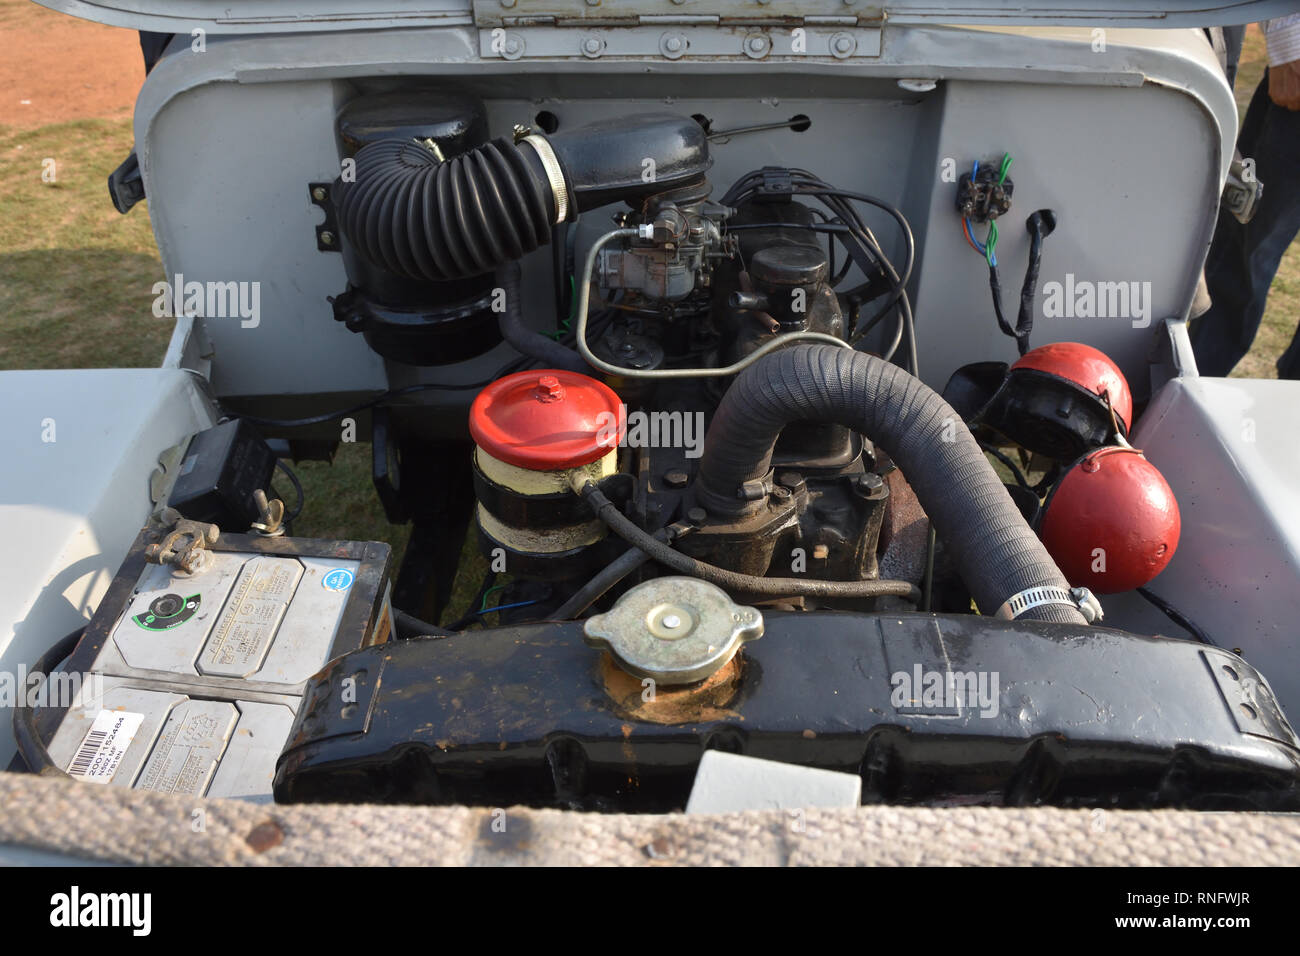 1959 Willys Jeep engine with 1560 cc and 4 cylinder engine. WBC 4858 India  Stock Photo - Alamy